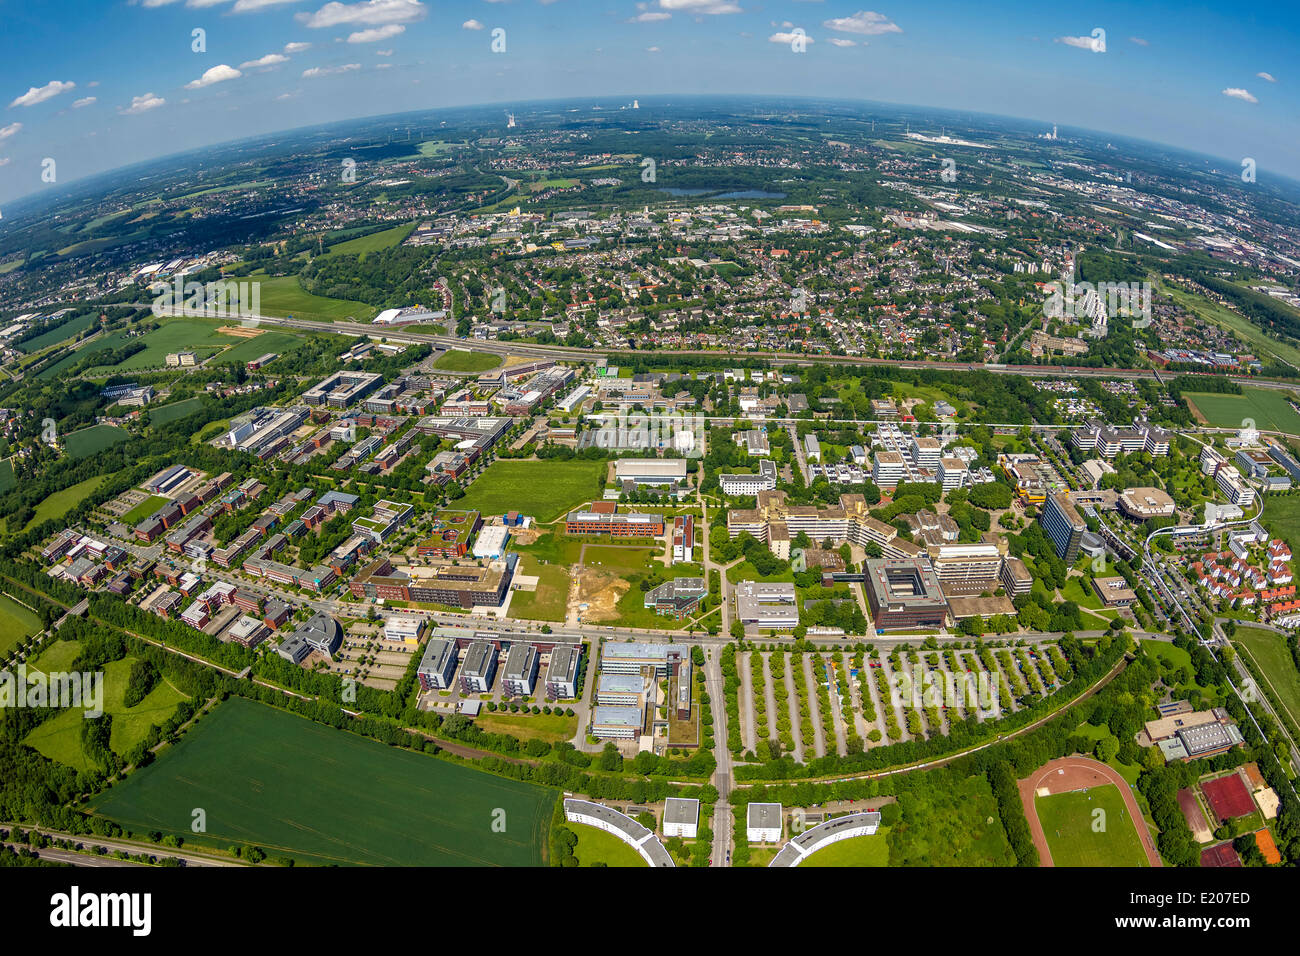 Aerial view, TechnologyPark Dortmund, campus of Dortmund, University of Dortmund, Dortmund, Ruhr district Stock Photo